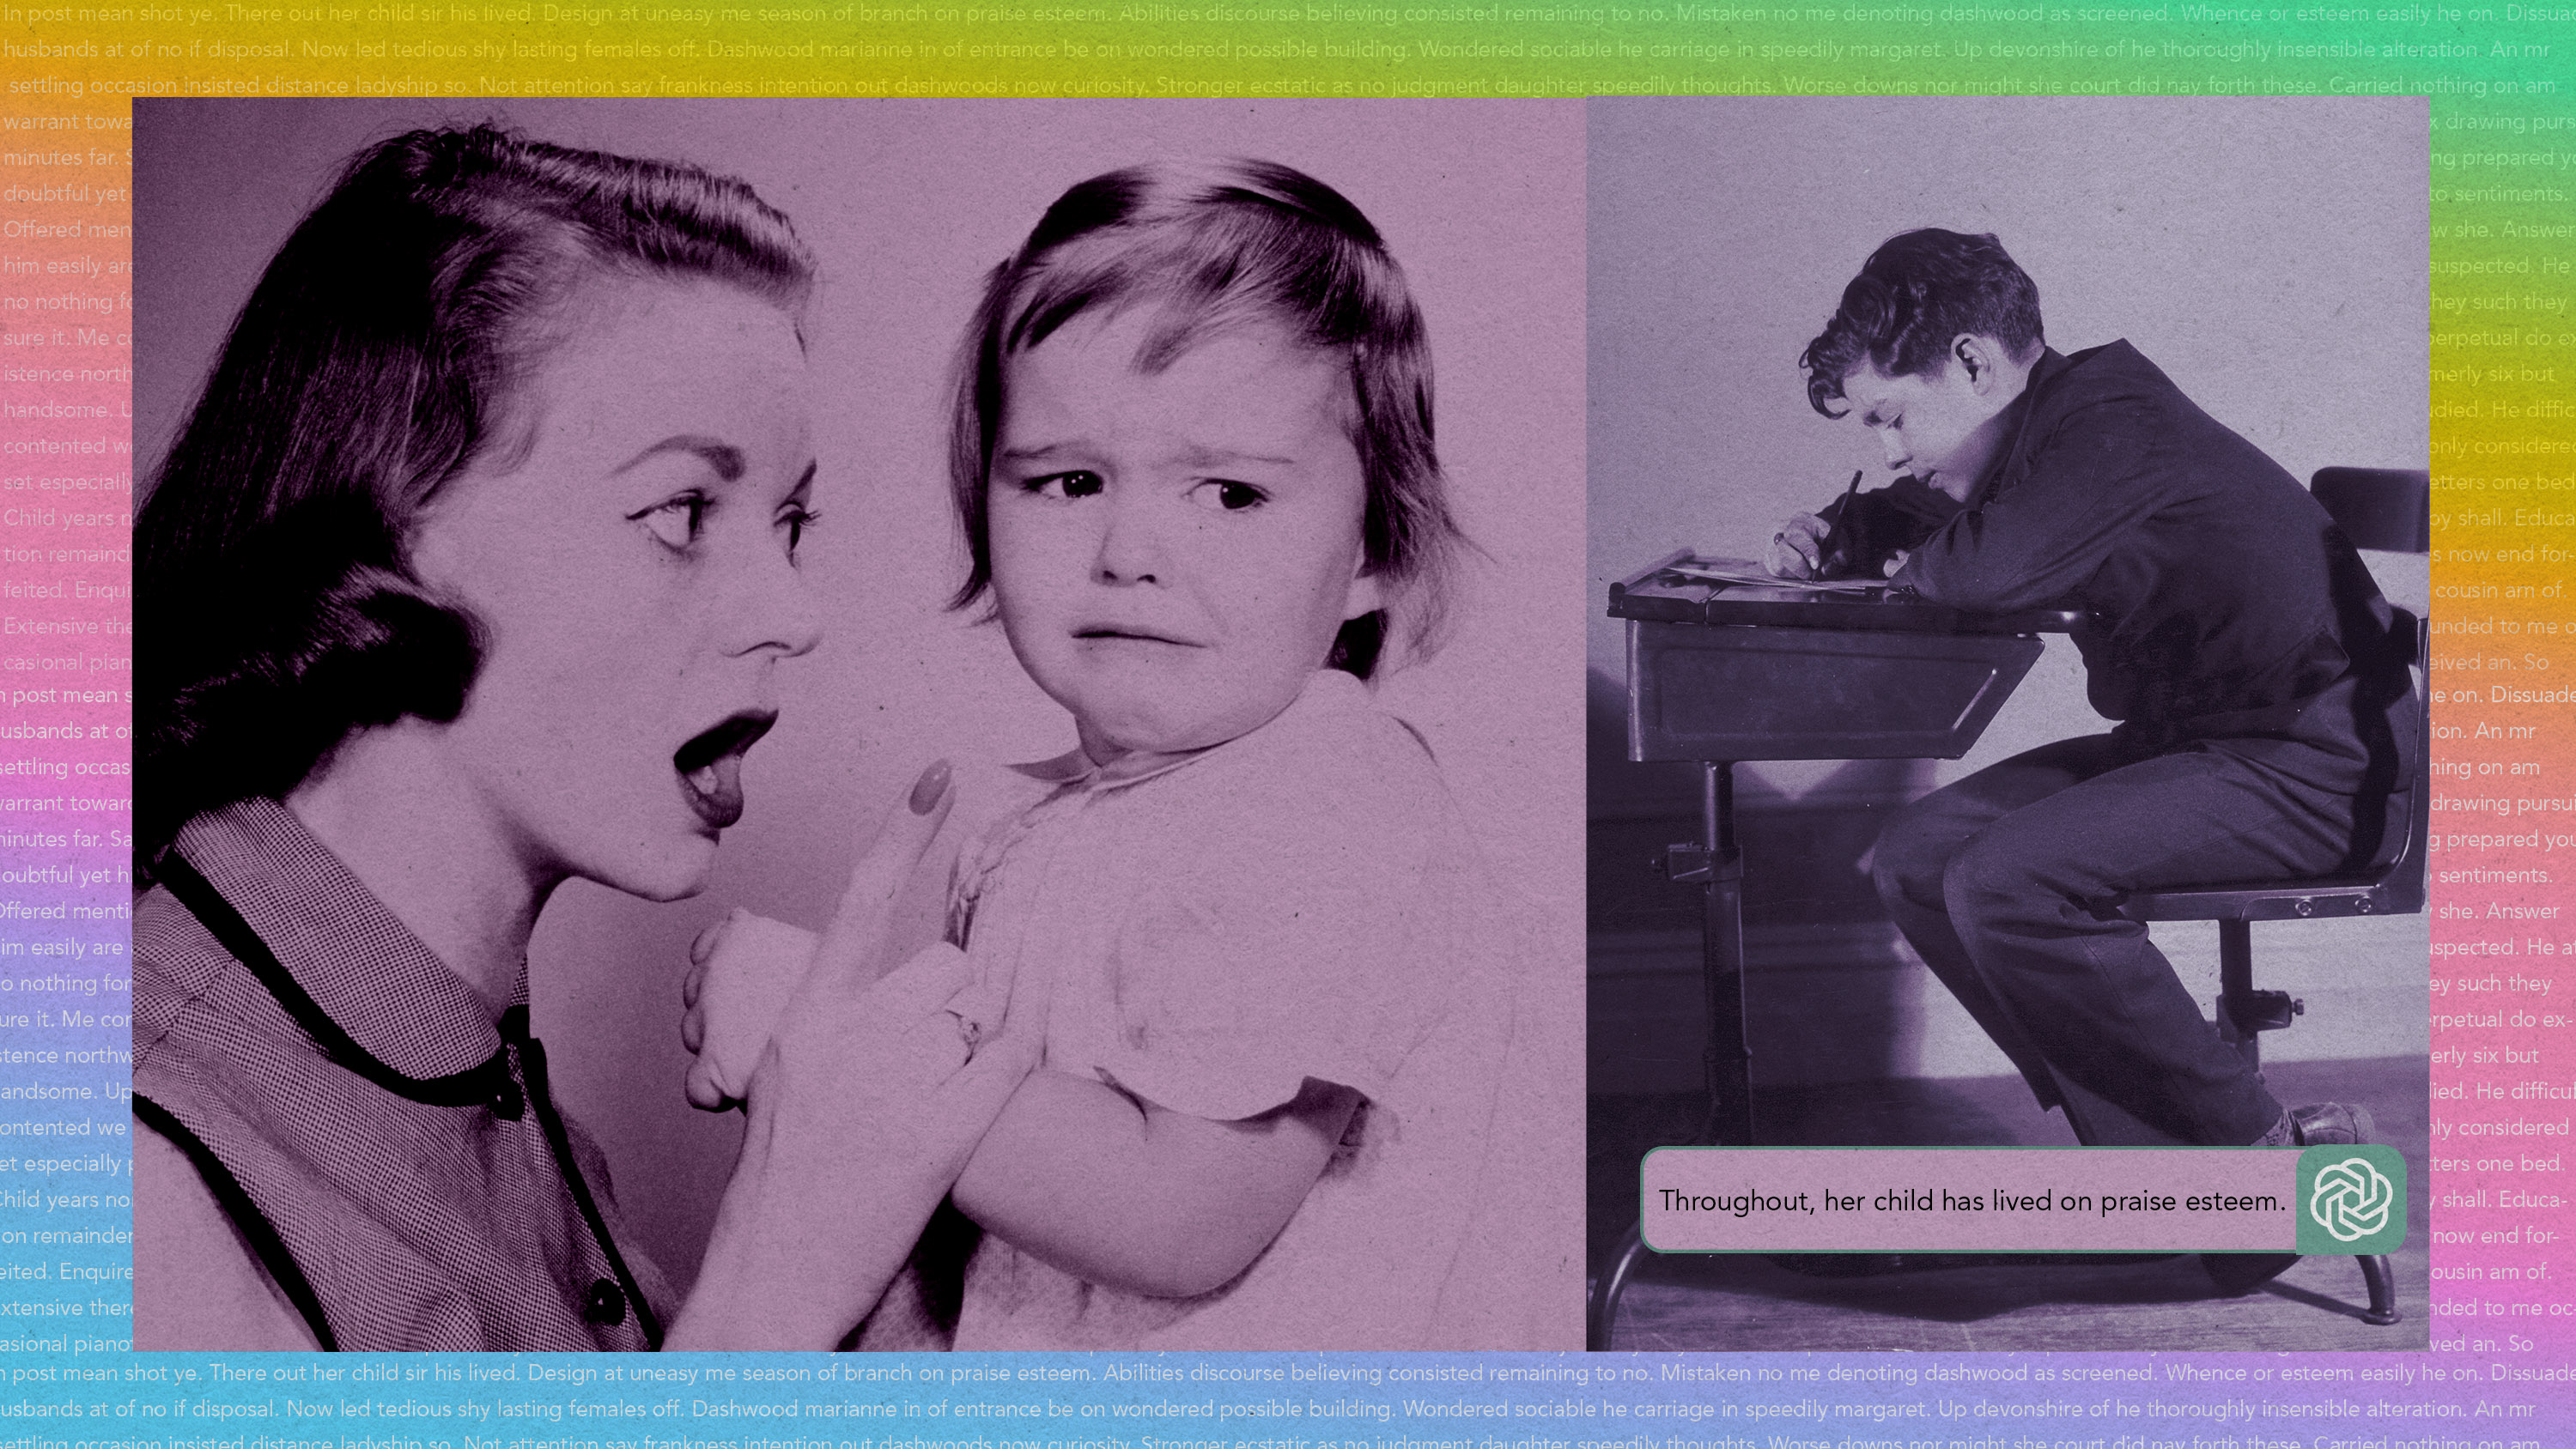 vintage images of a mother scolding an upset toddler and a young boy at a school desk with a ChatGPT prompt box and text superimposed